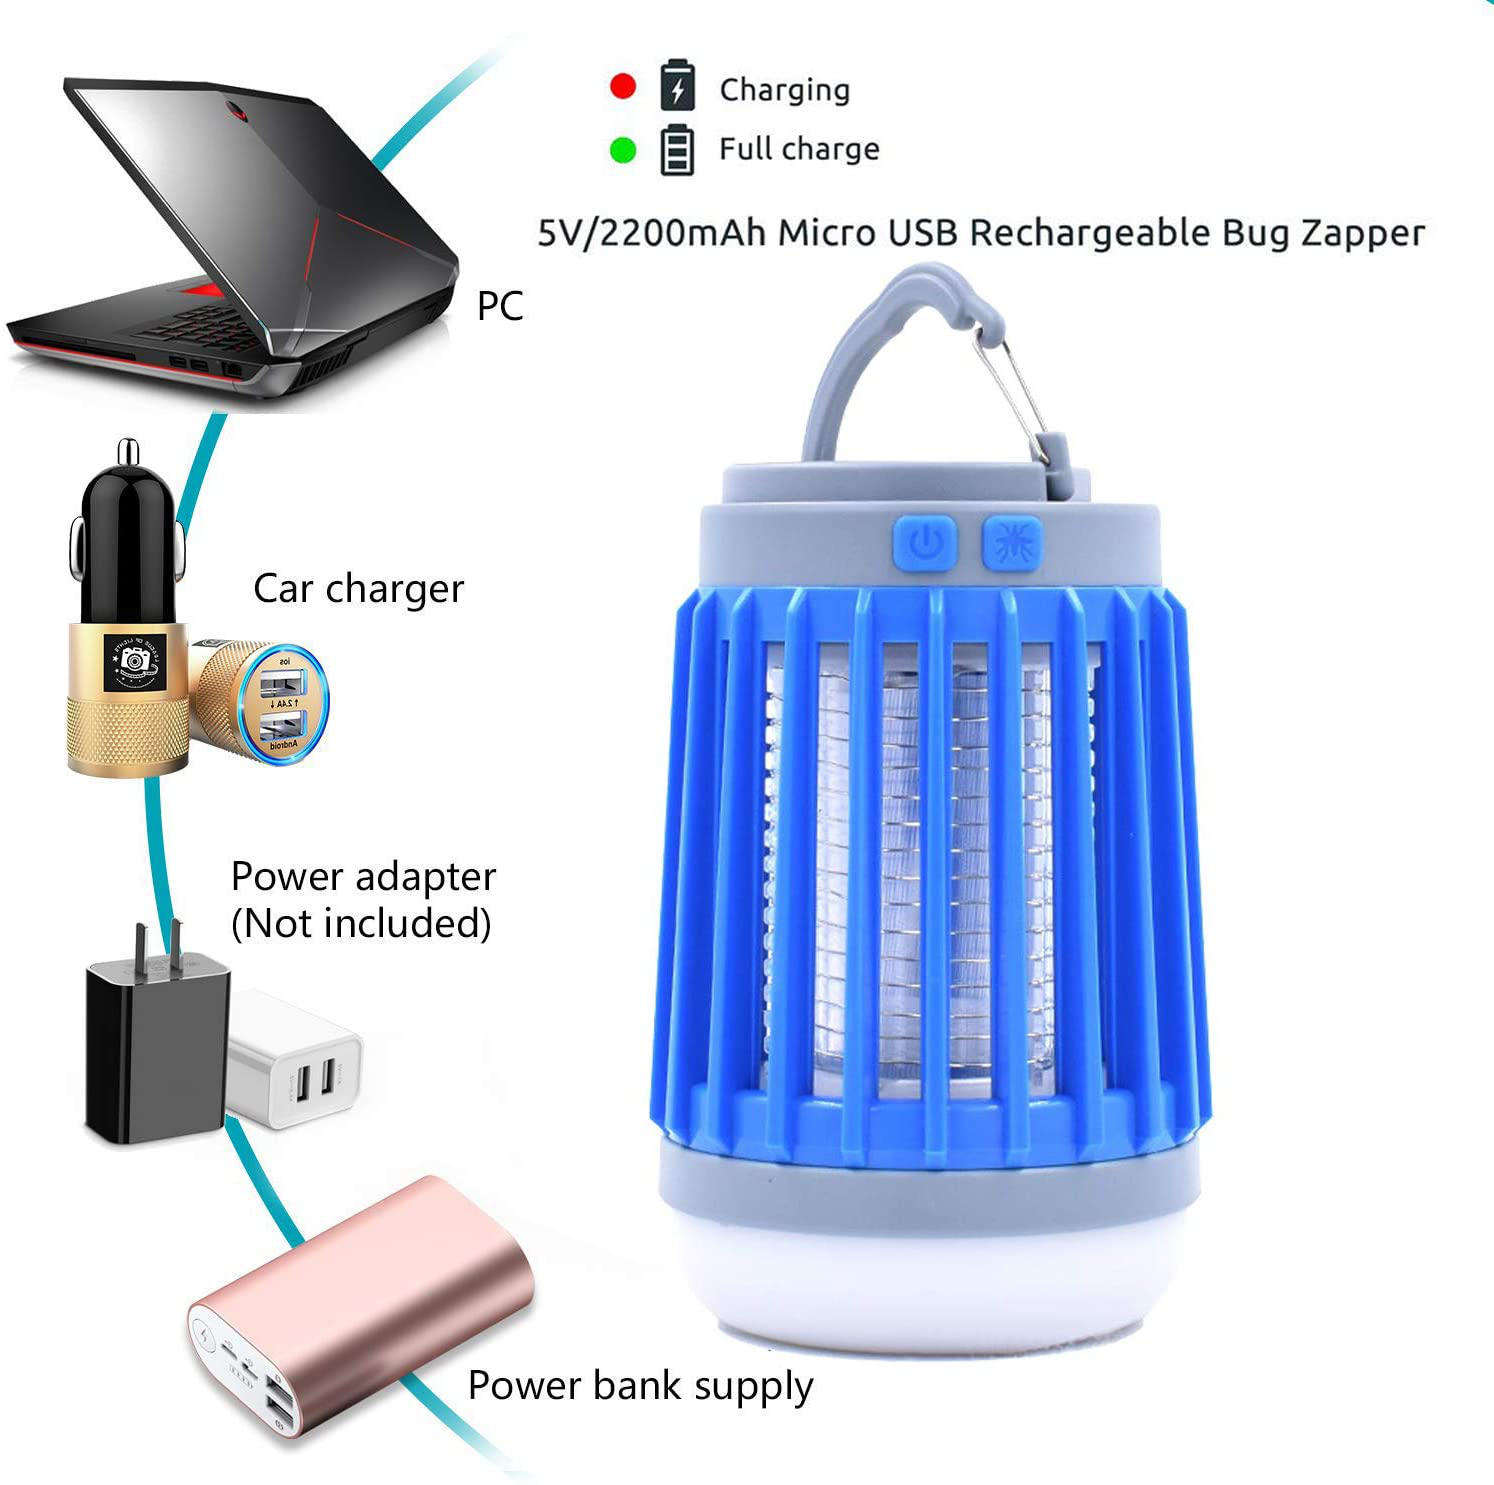 2021 Bug Zapper Outdoor Camping Lantern LED Flashlight Tent Light, 3-in-1 Portable IPX7 Waterproof Mosquito Killer Camp Lamp with 2200mAh USB Rechargeable Battery, SOS Emergency, Retractable Hook